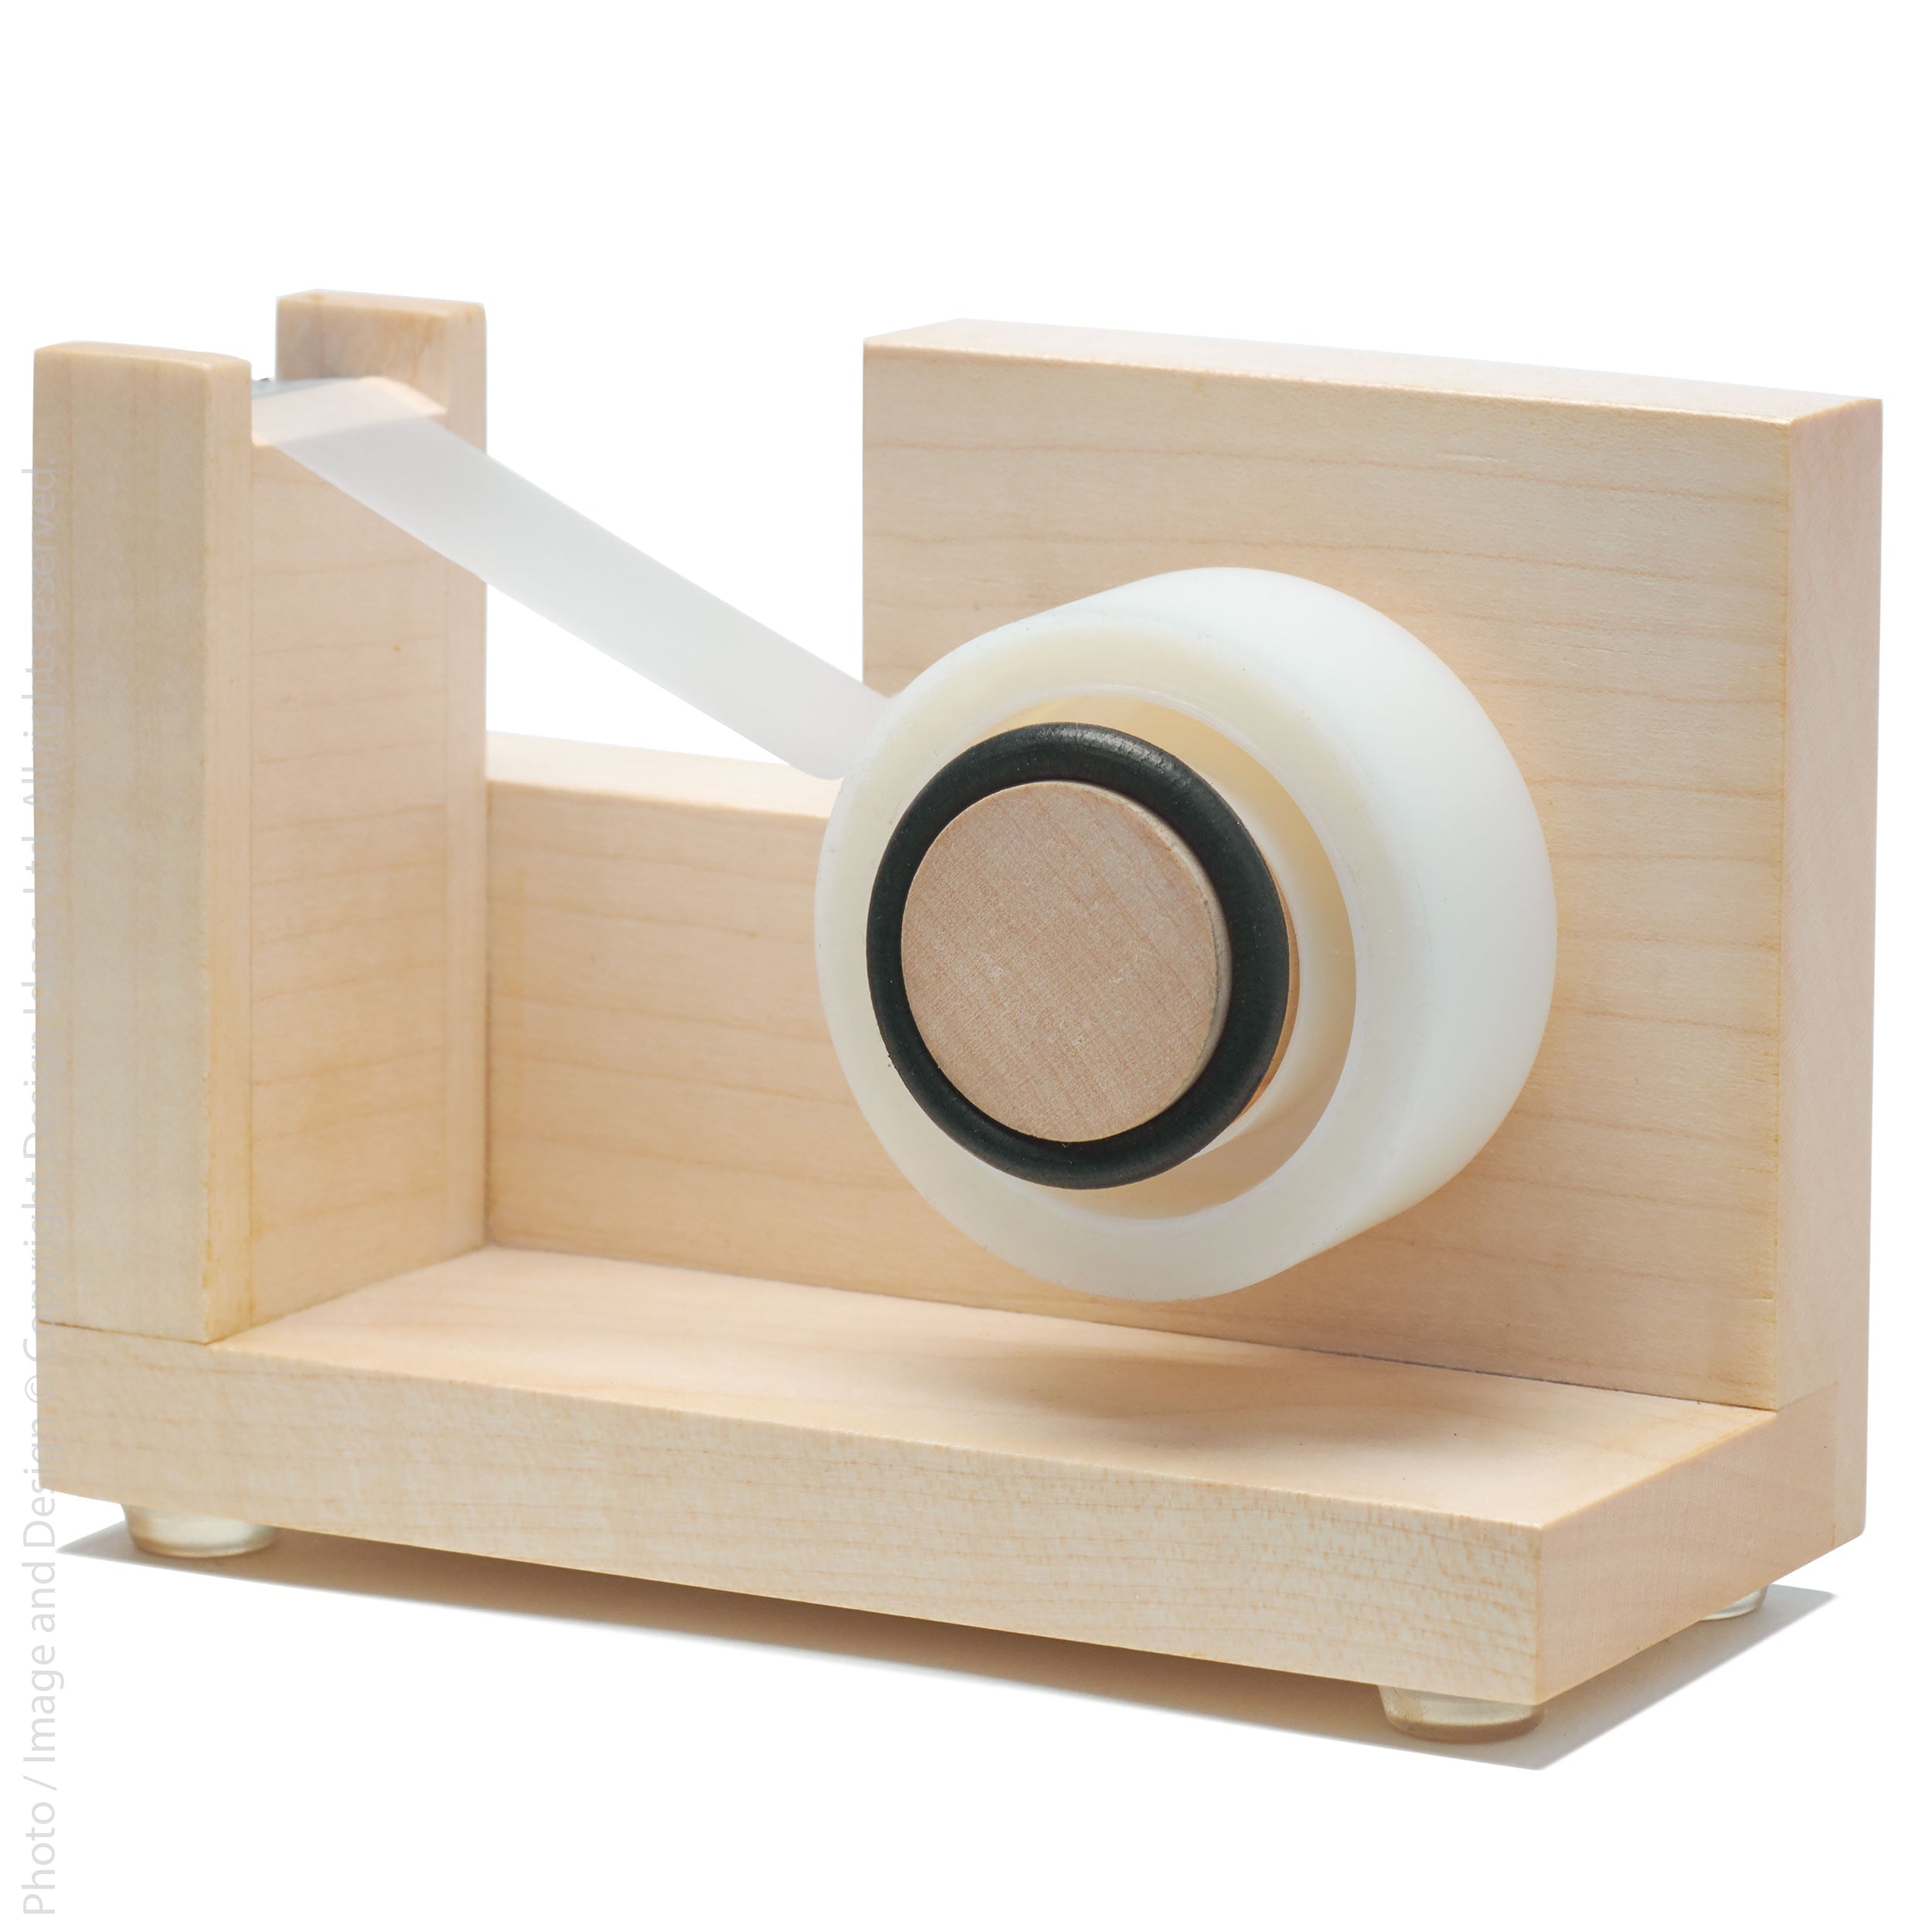 Upland Sycamore Tape Dispenser   | Image 5 | From the Upland Collection | Elegantly created with natural sycamore for long lasting use | Available in natural color | texxture home